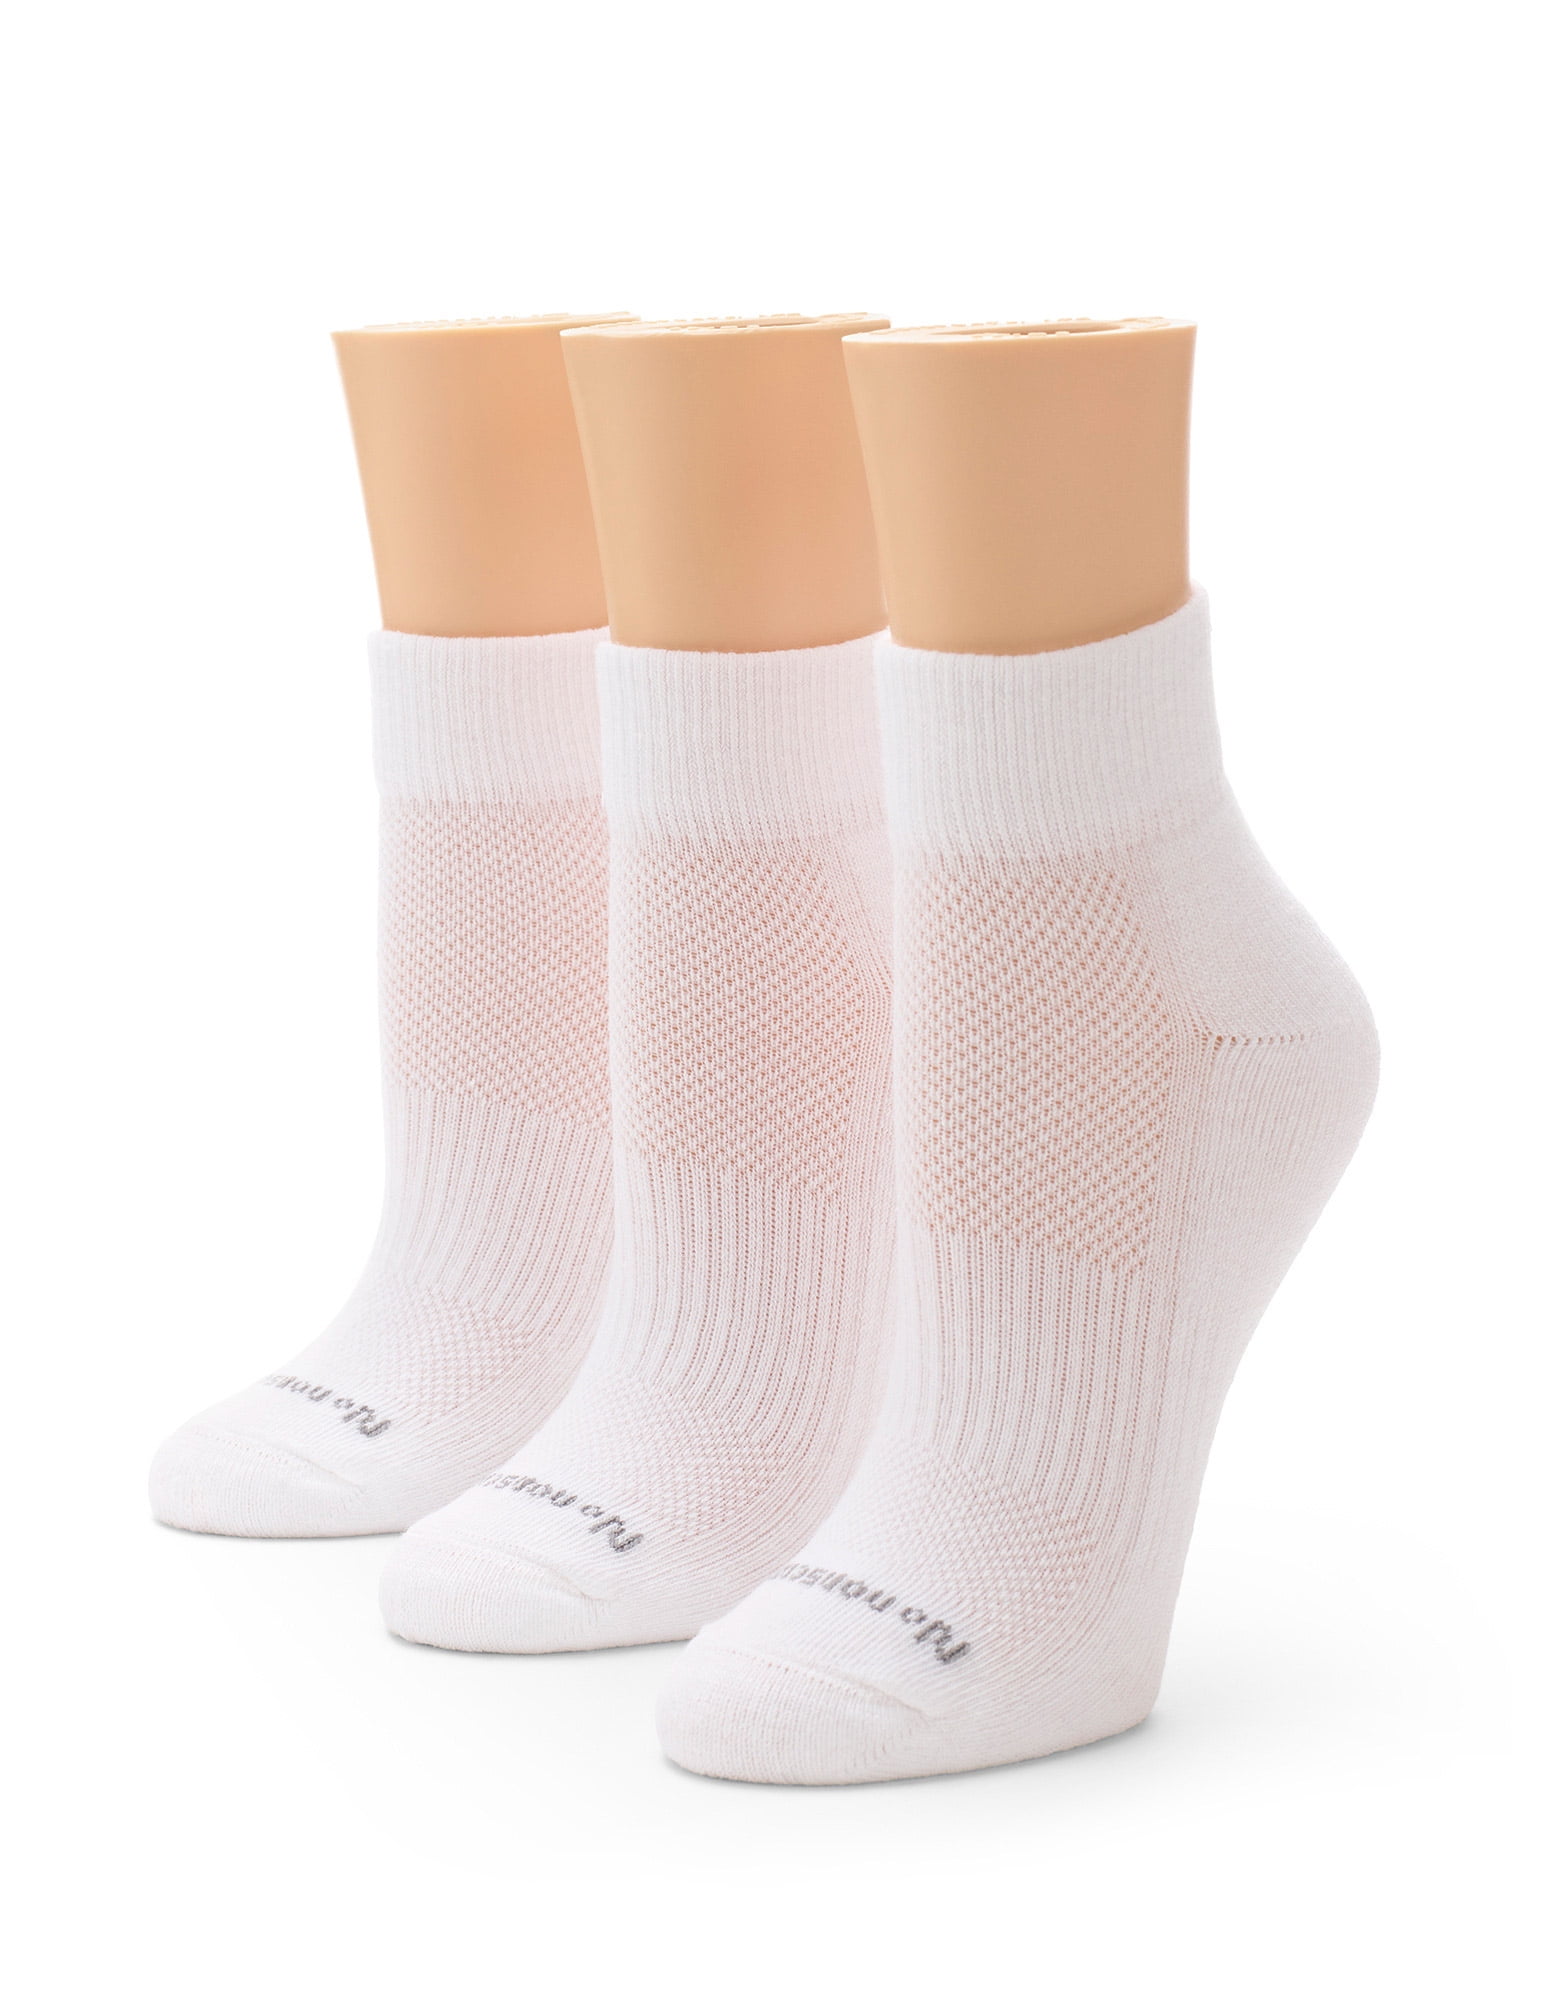 No nonsense Women's Soft & Breathable Cushioned Ankle Socks 3 Pair